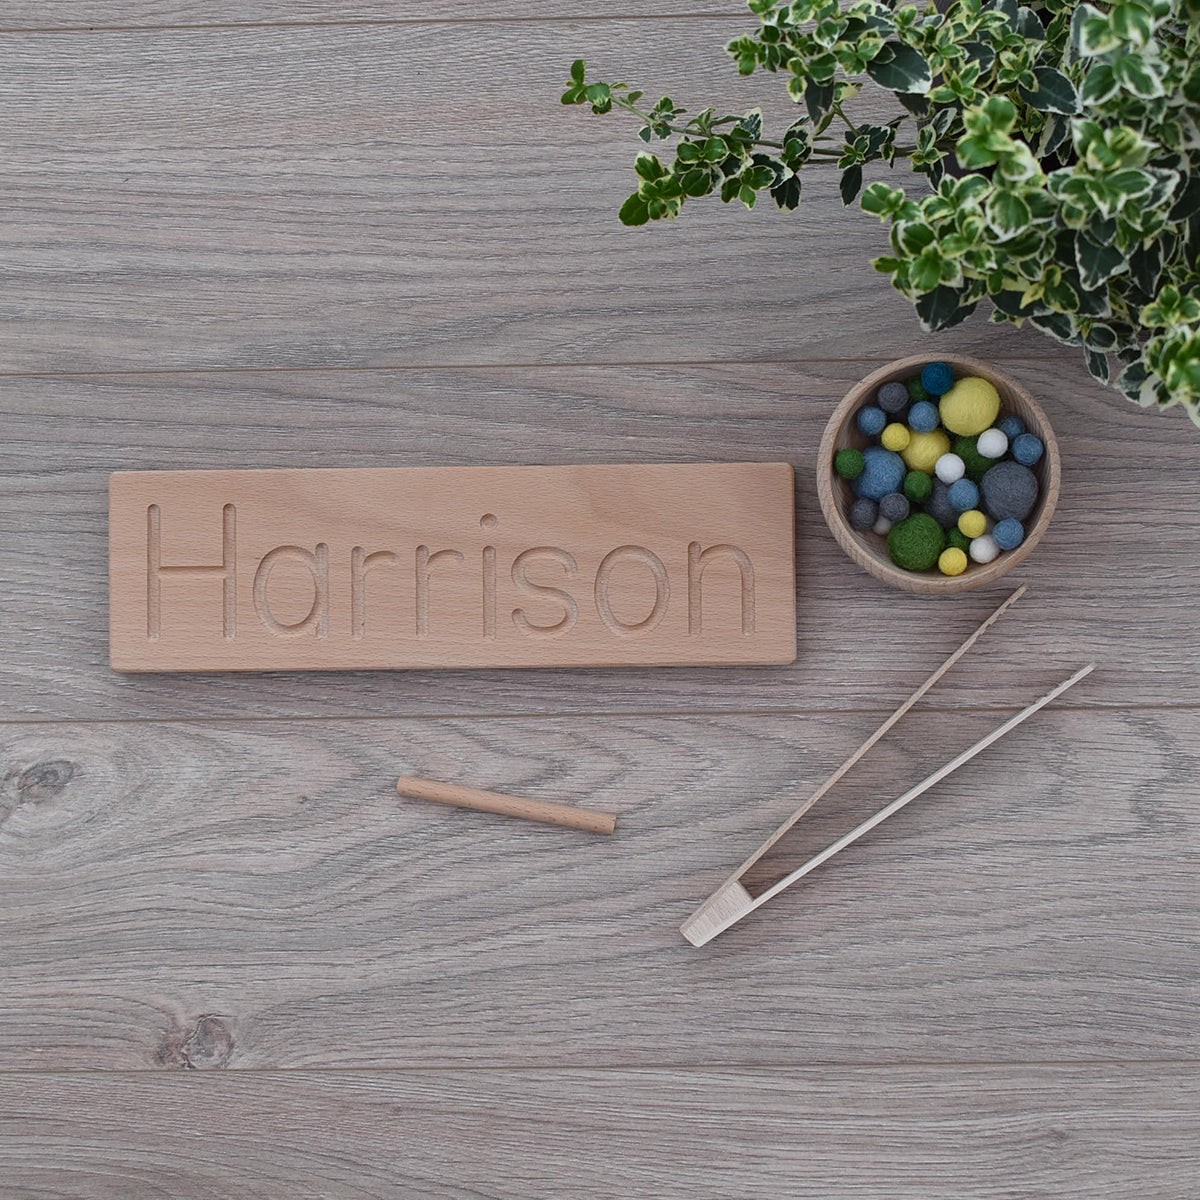 Harrison DrawMe personalised wooden name board used for learning to write and fine motor skill sensory play